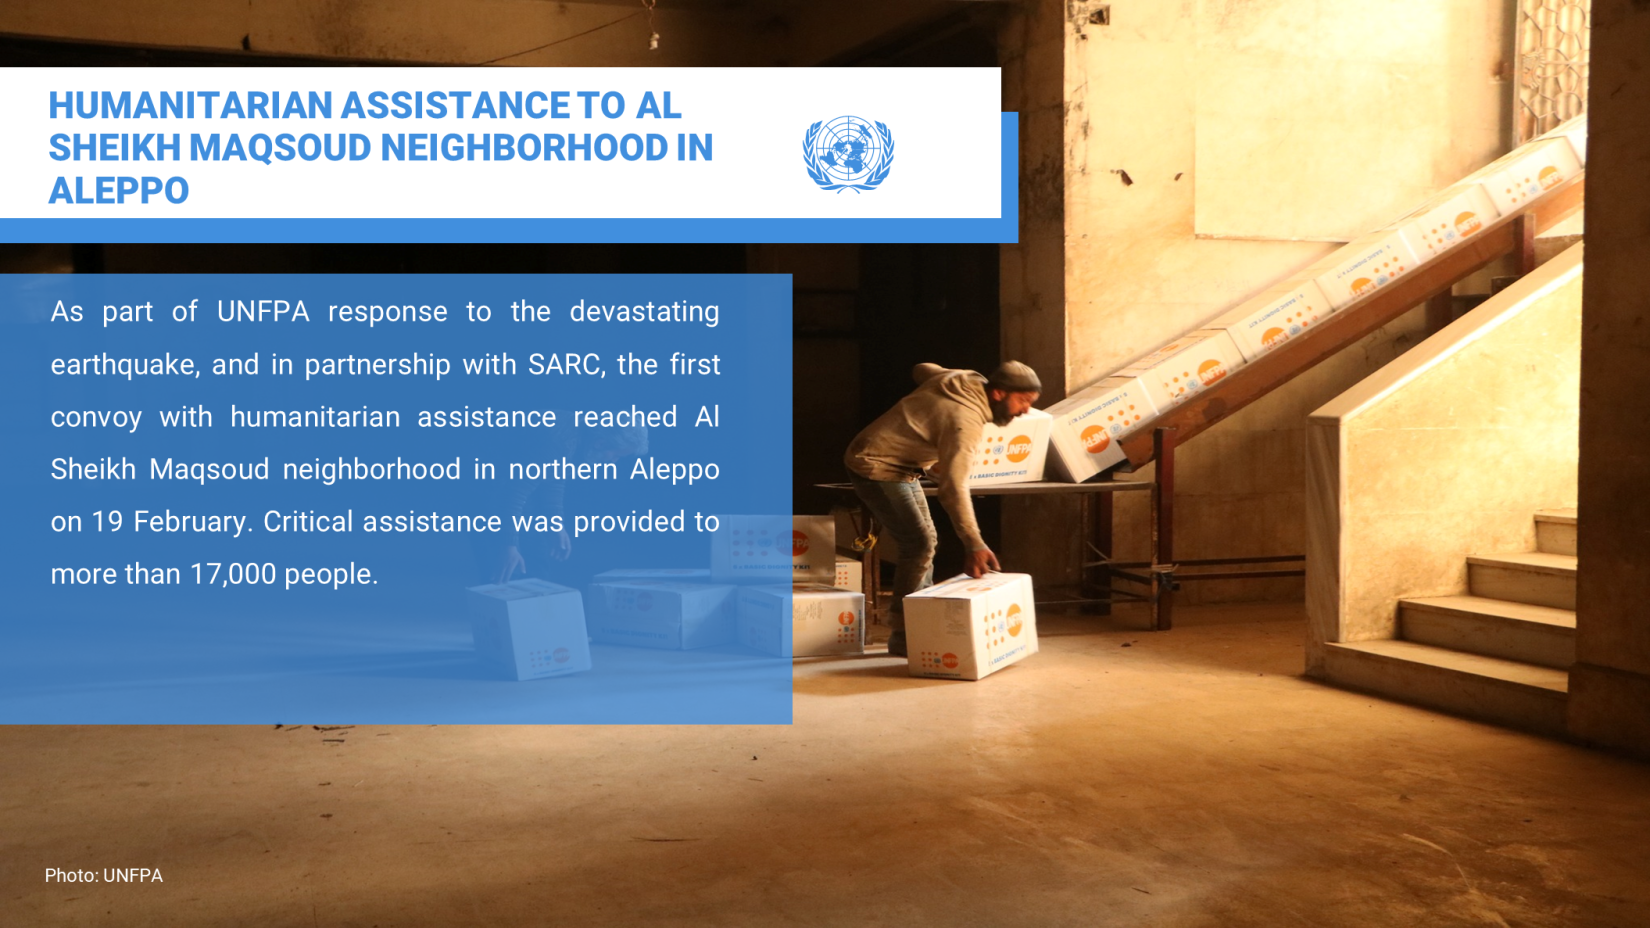 UNFPA HUMANITARIAN ASSISTANCE TO AL SHEIKH MAQSOUD NEIGHBORHOOD IN ALEPPO